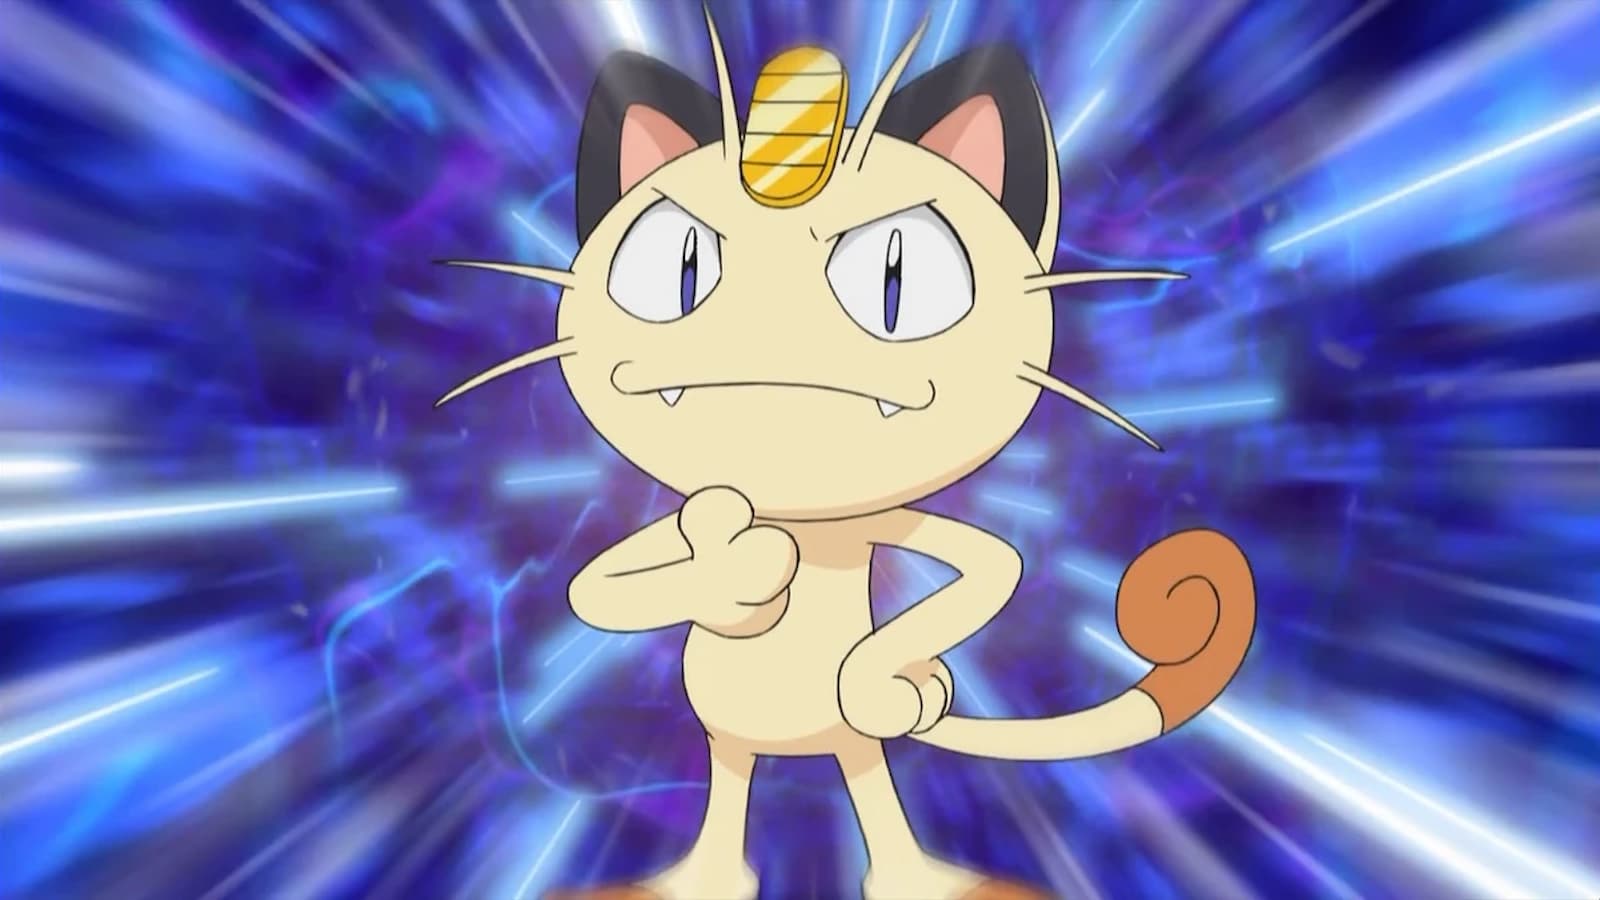 Meowth from Team Rocket in the Pokemon Anime